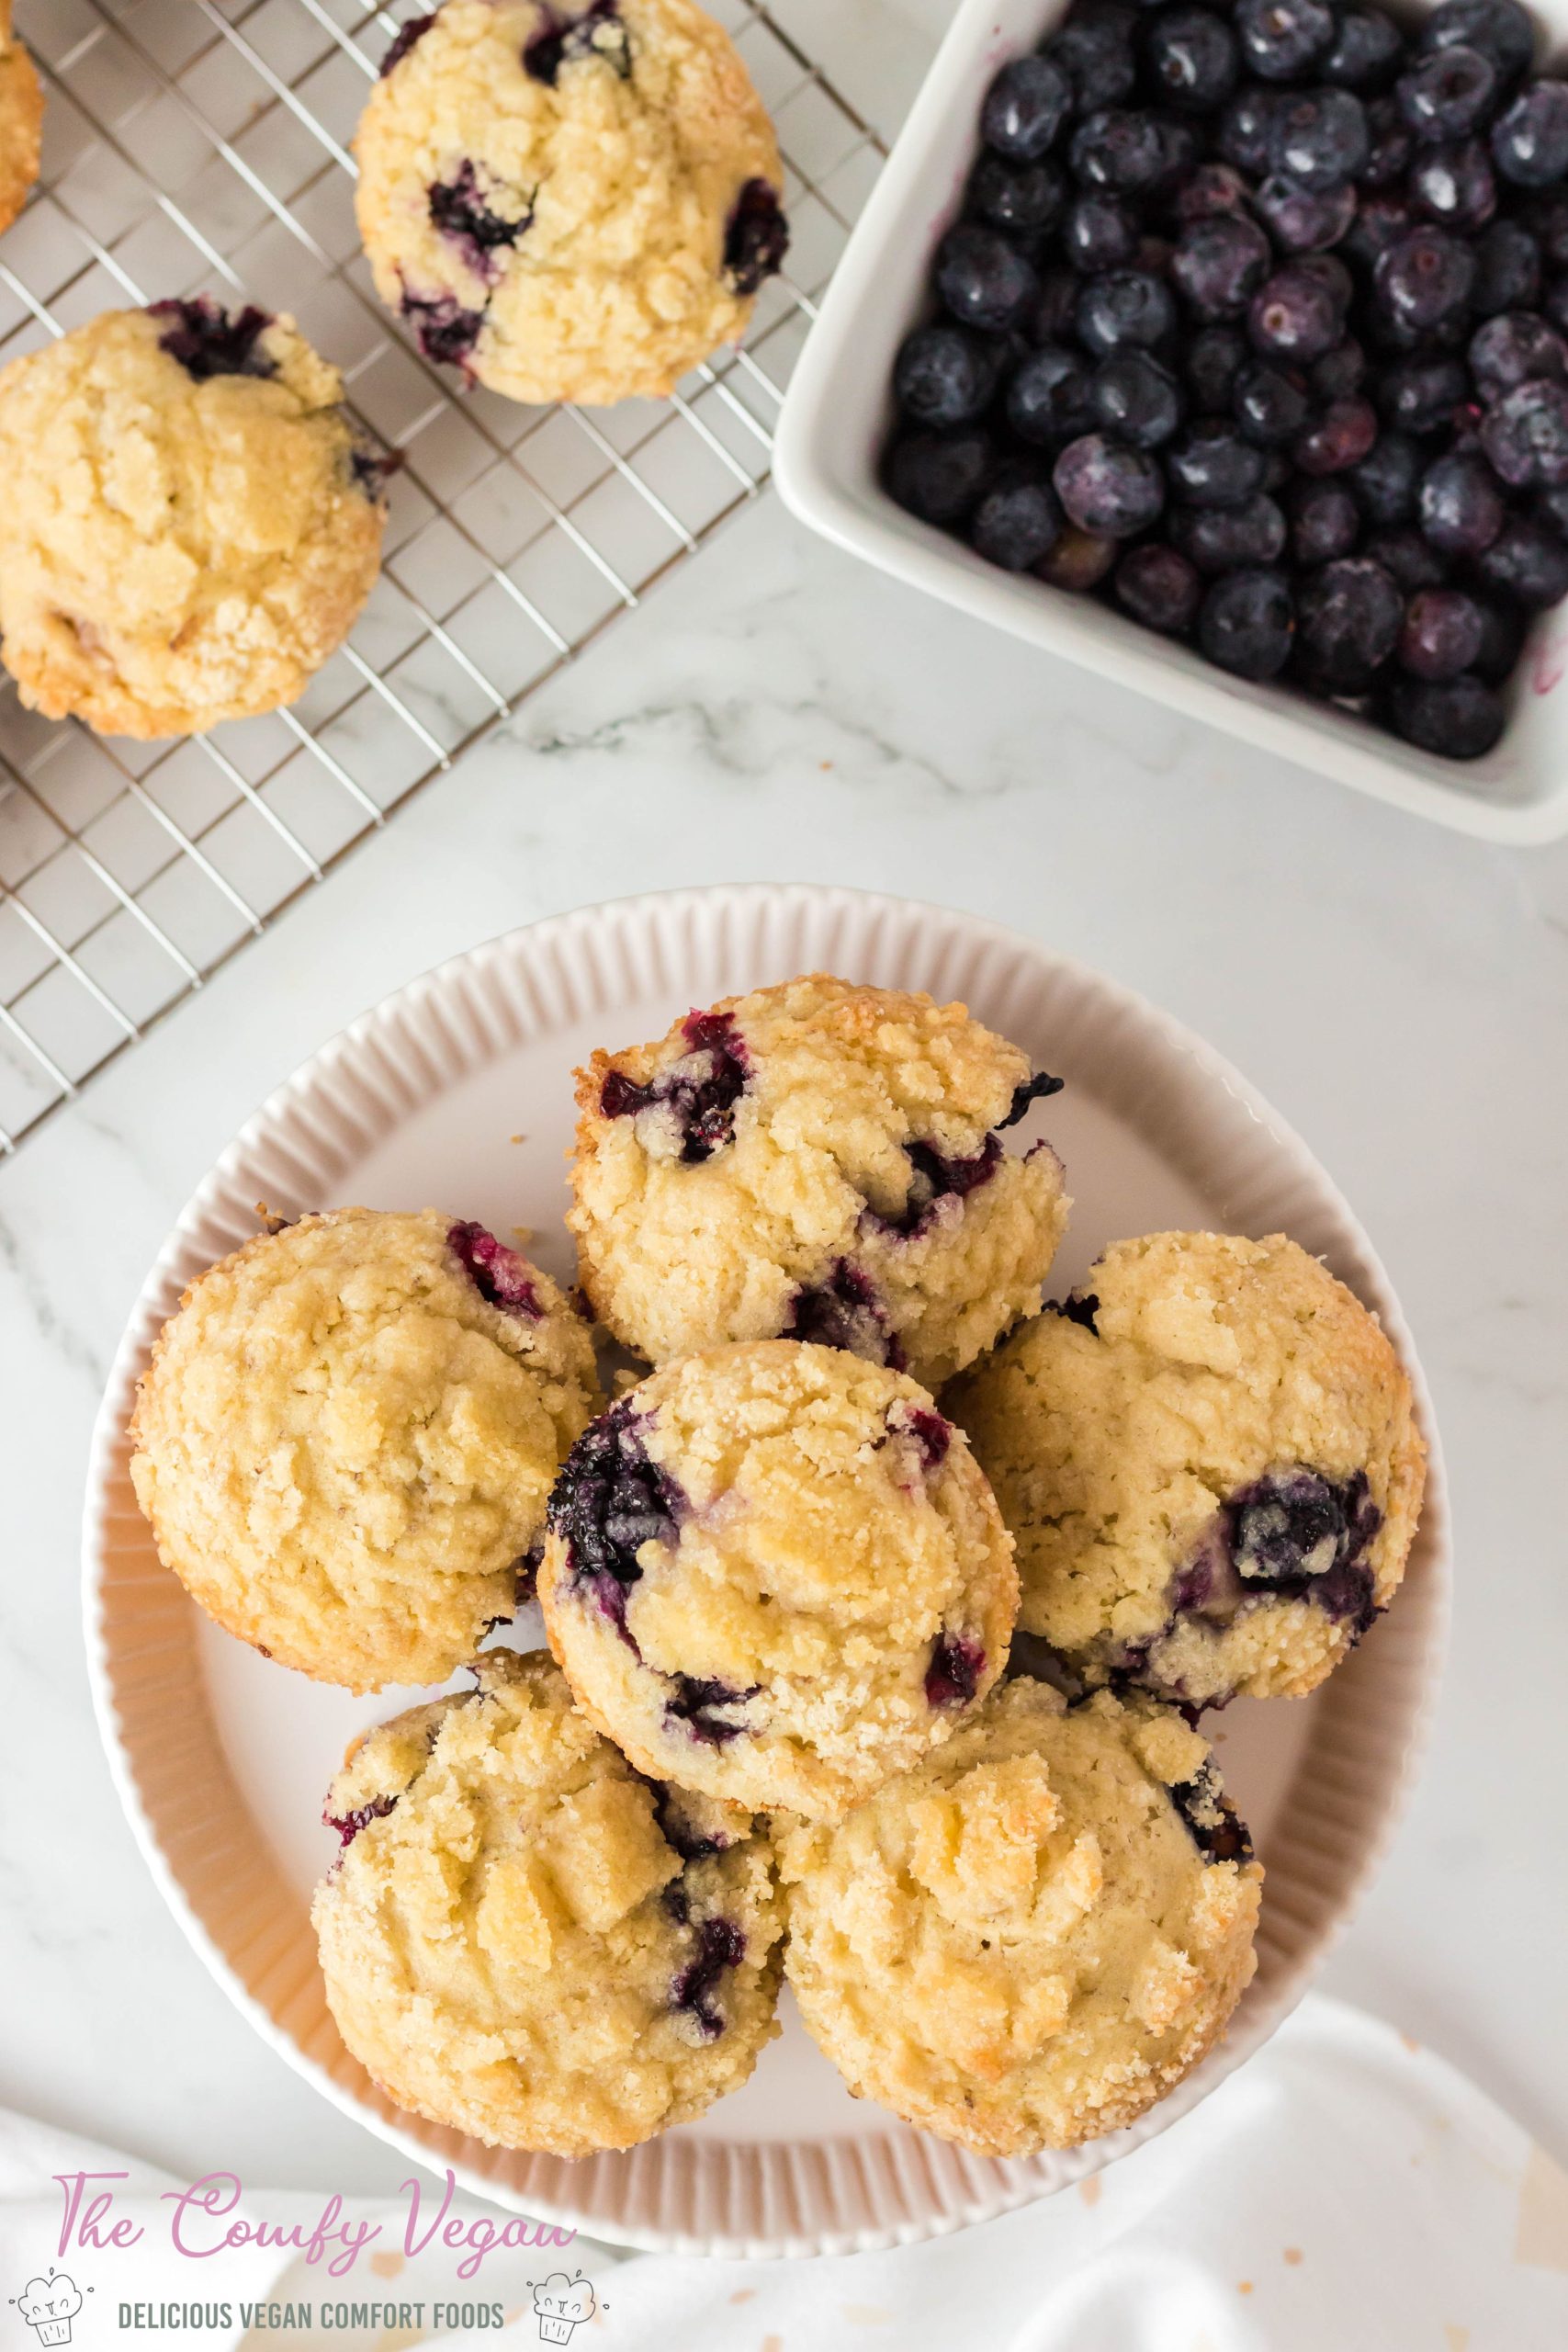 Easy and perfectly moist Vegan Blueberry Muffins. They're perfectly soft, sweet, and topped with a delicious crumb cote reminding you of muffins you'll find at your local bakery. Easy to make, fully vegan, and made in one bowl!